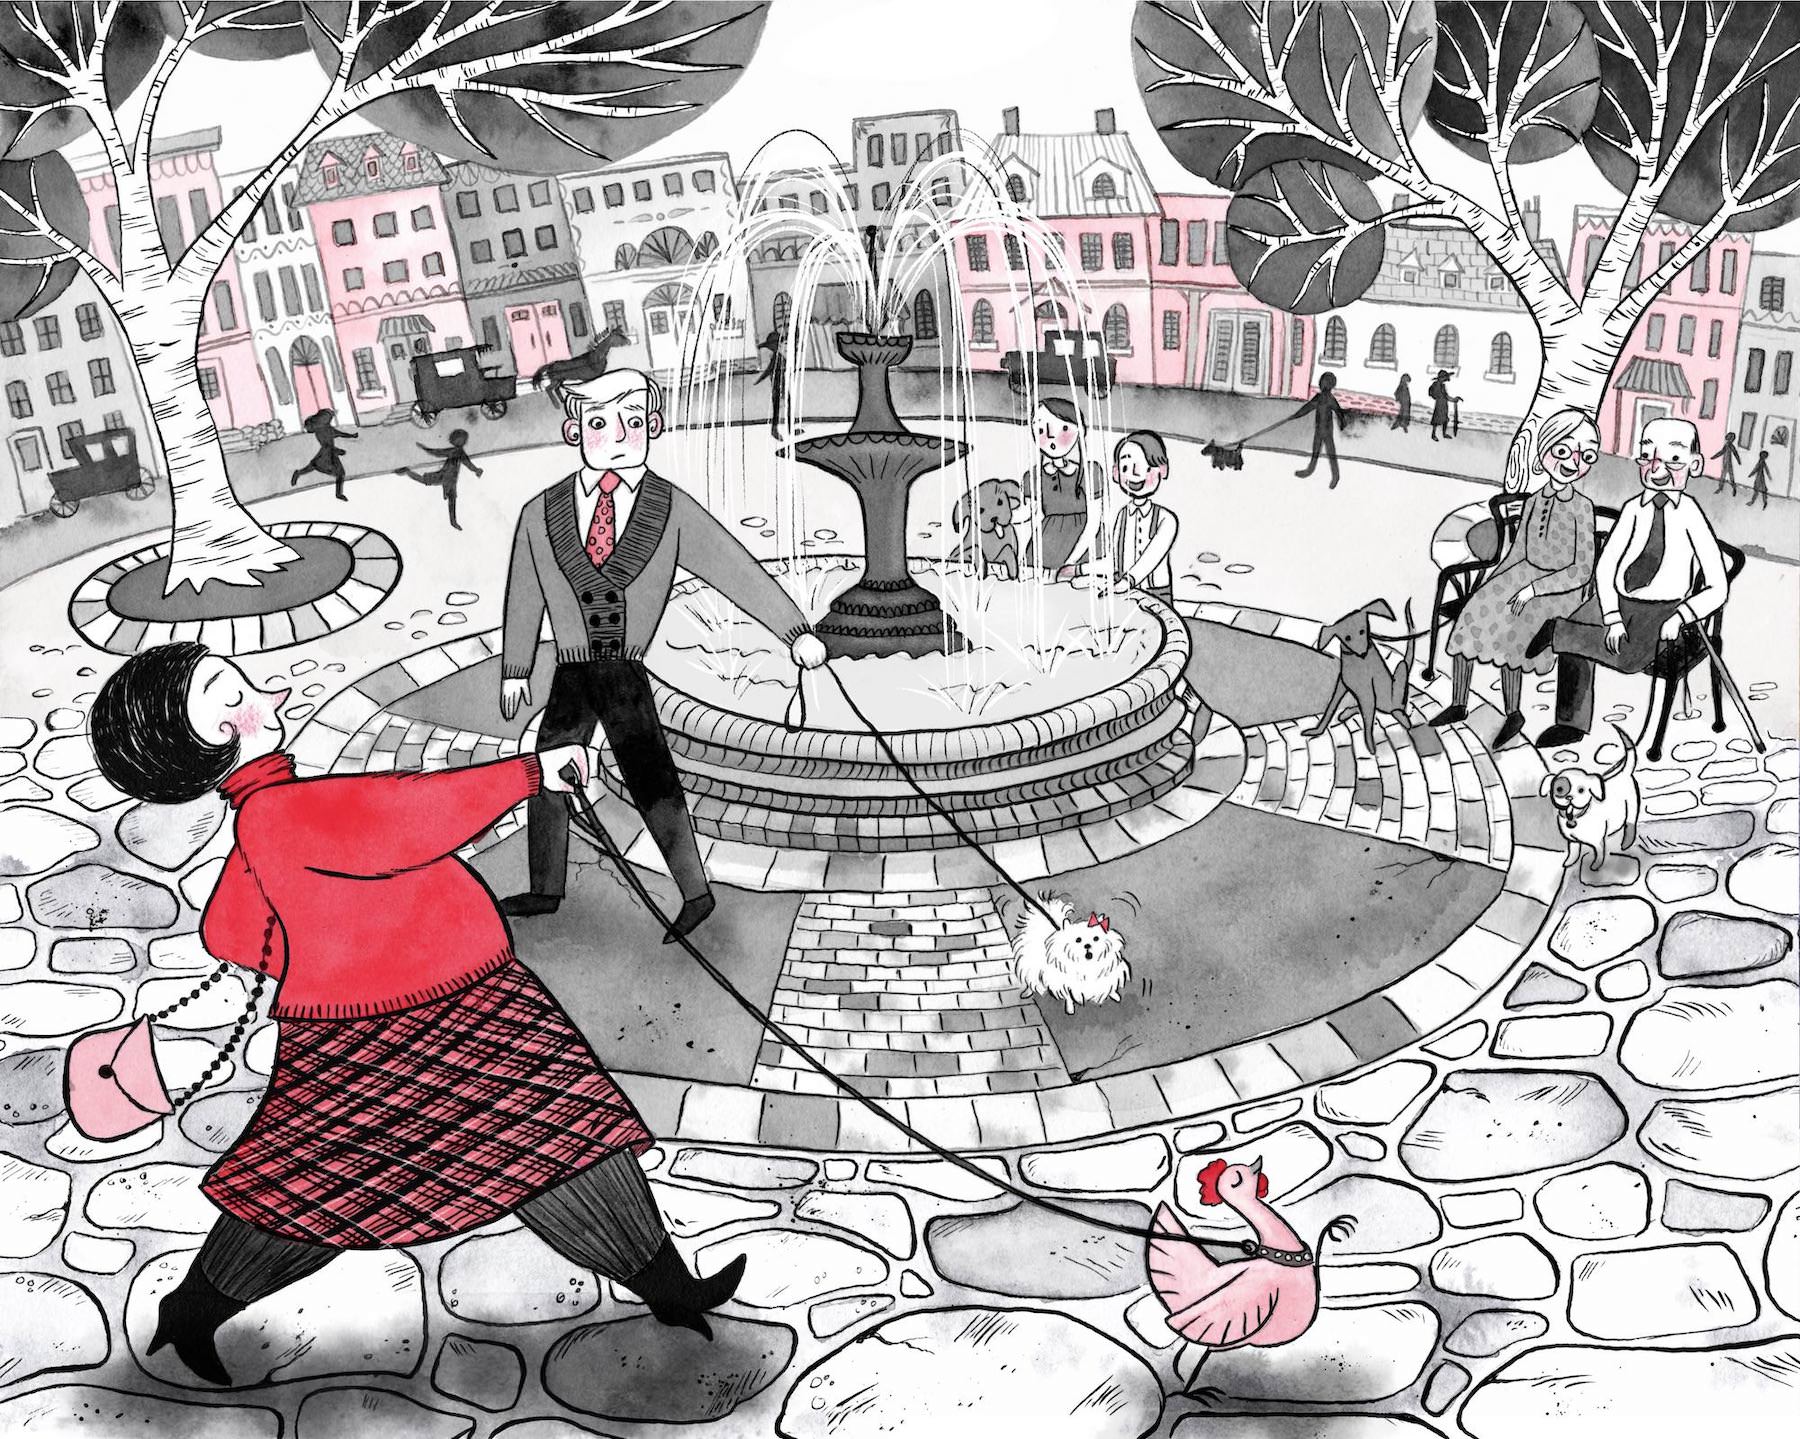 Black and white and red children's book illustration of a woman strutting proudly across a city square with her pet chicken on a leash in front of her. There is a row of shops in the background, and other people, all walking dogs, looking surprised and amused at the site of a lady walking a chicken.